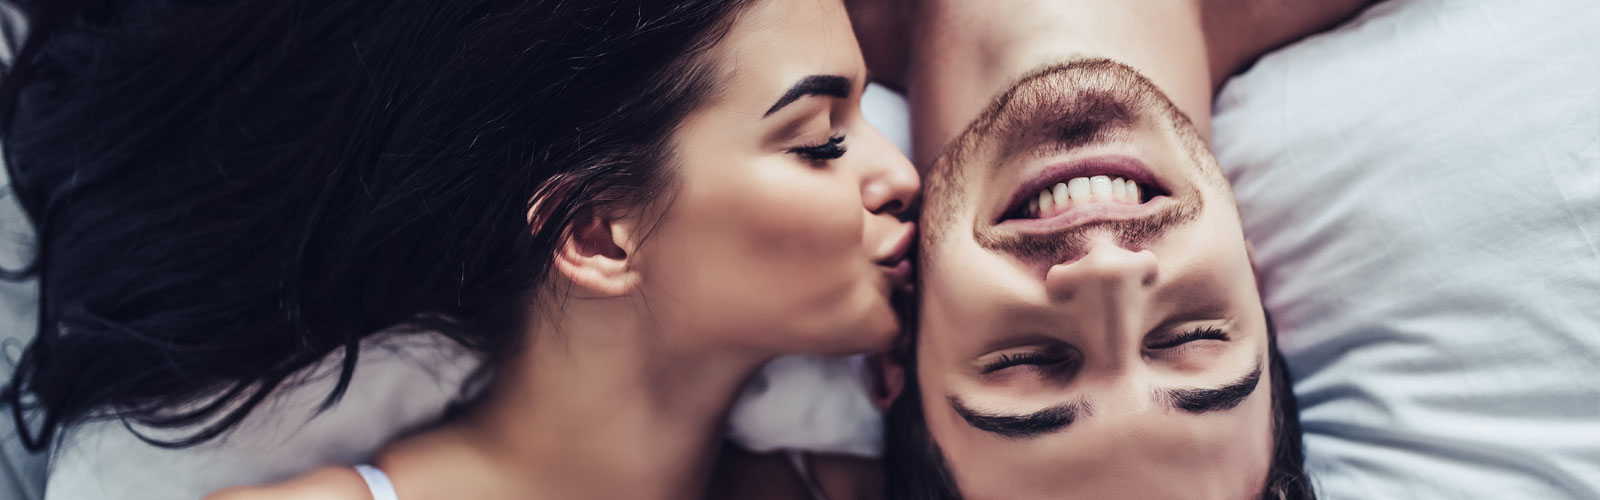 Woman kissing man's cheek in bed